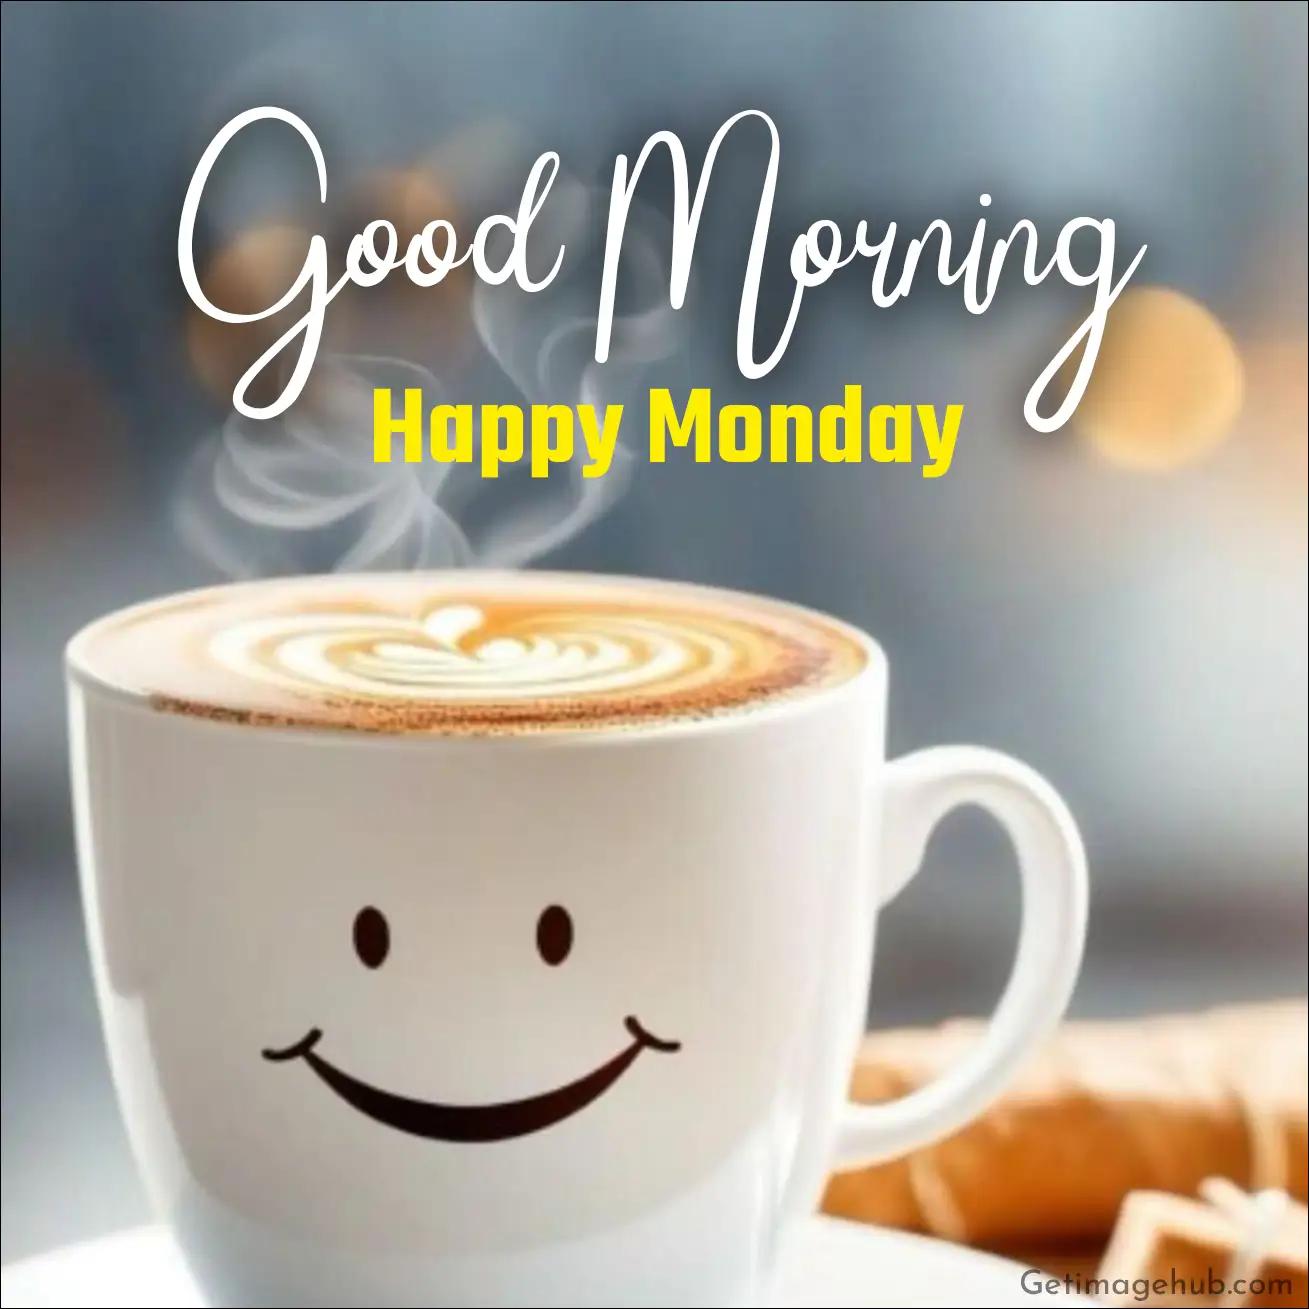 200+ Good Morning Happy Monday Images, Pictures, Photos